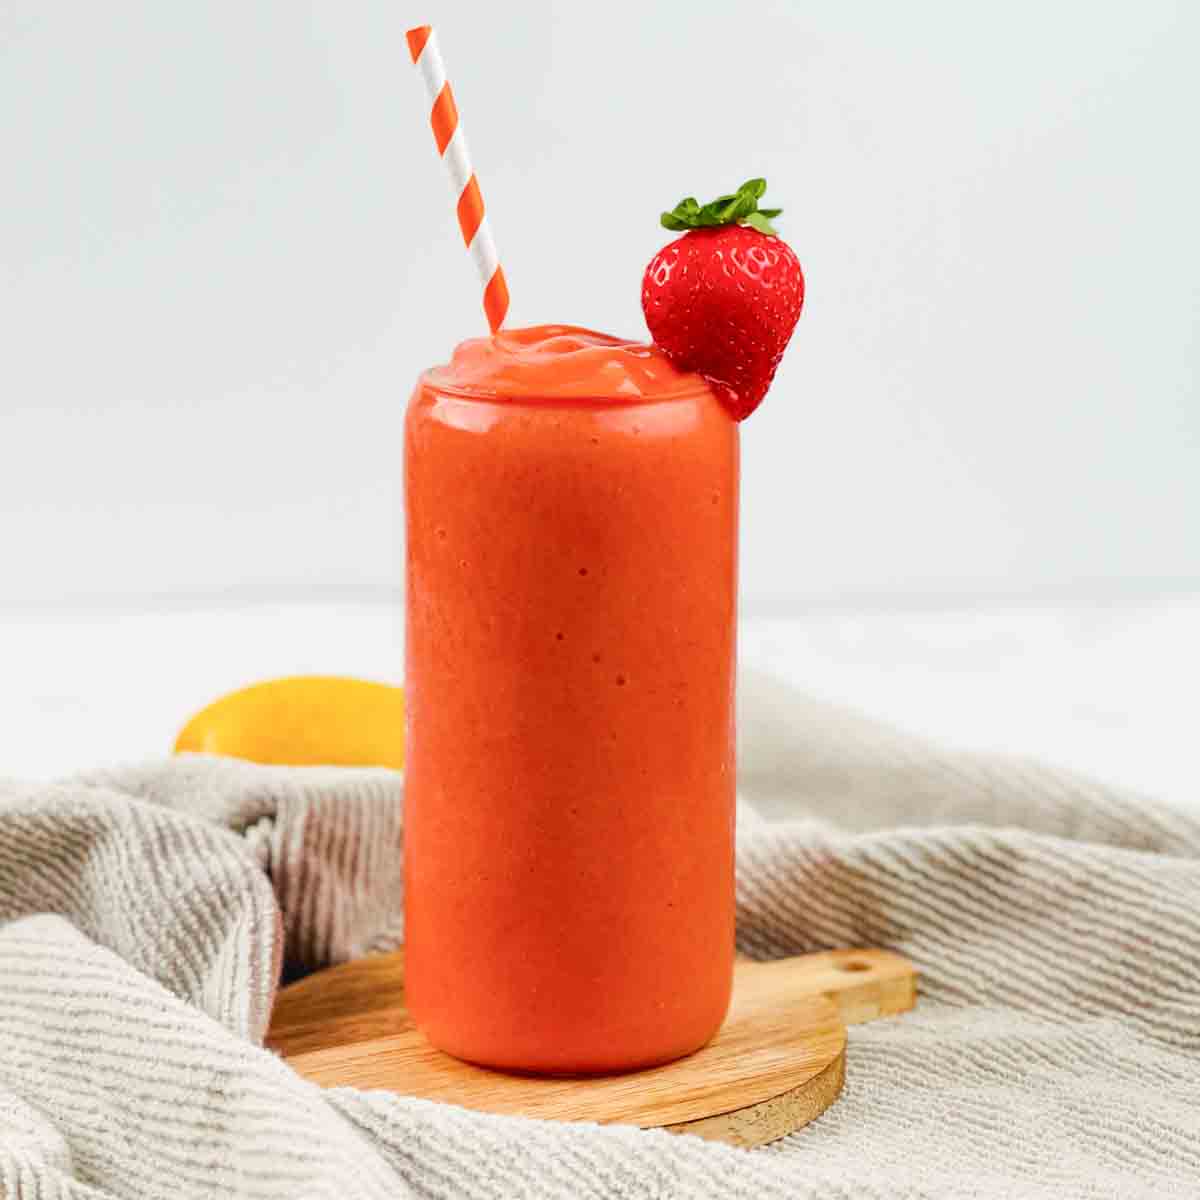 The Sunrise Sunset smoothie in a tall glass with an orange and white striped straw.